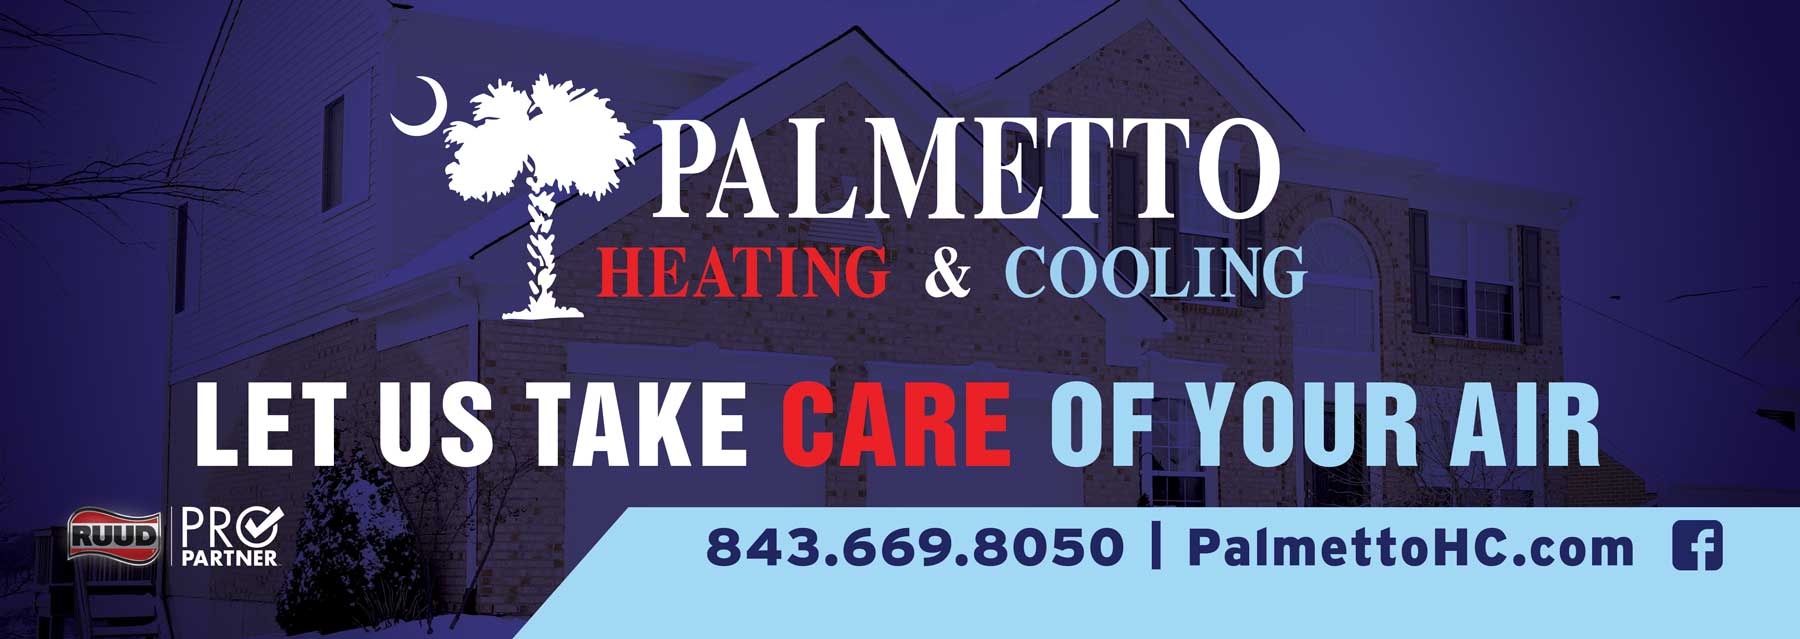 Get Heating and Air checkup from Palmetto Heating and Cooling!